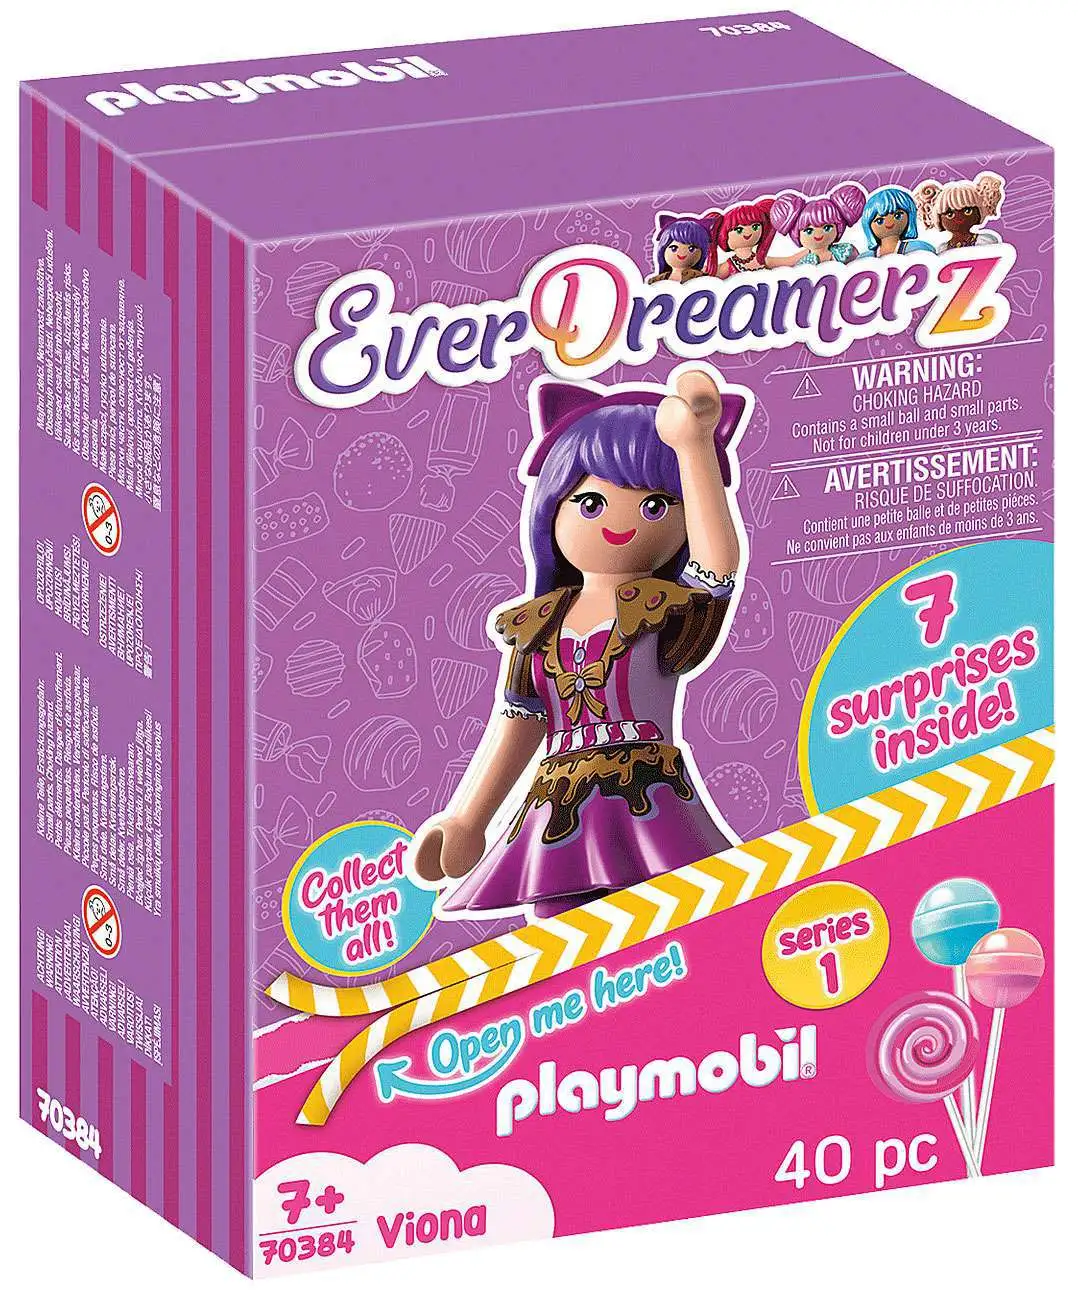 Playmobil Ever Dreamerz Rosalee Building Set 70385 NEW IN STOCK 